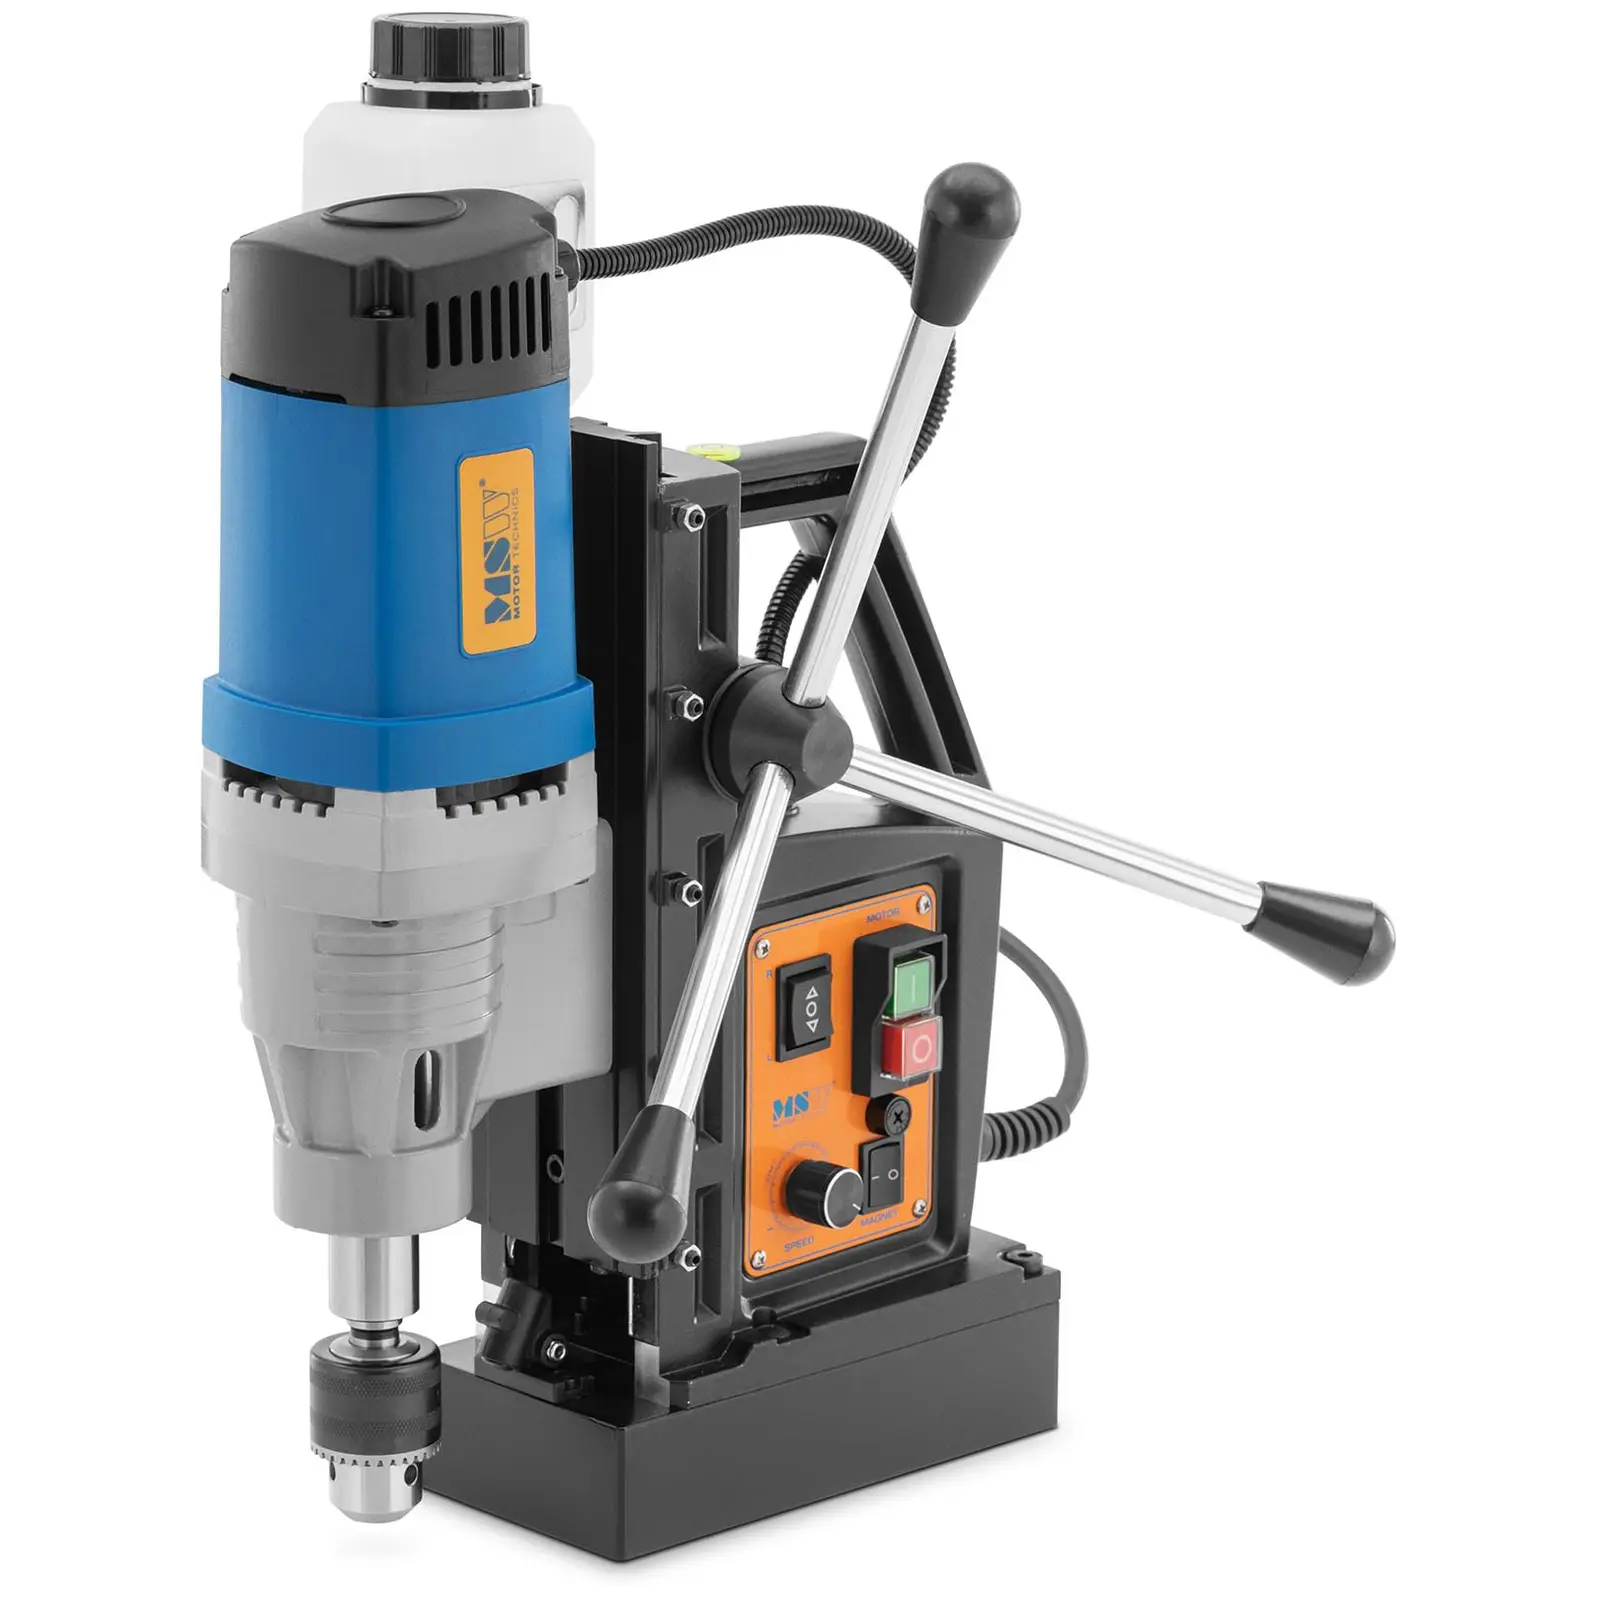 Magnetic drill - 1300 W - 475 rpm - laser